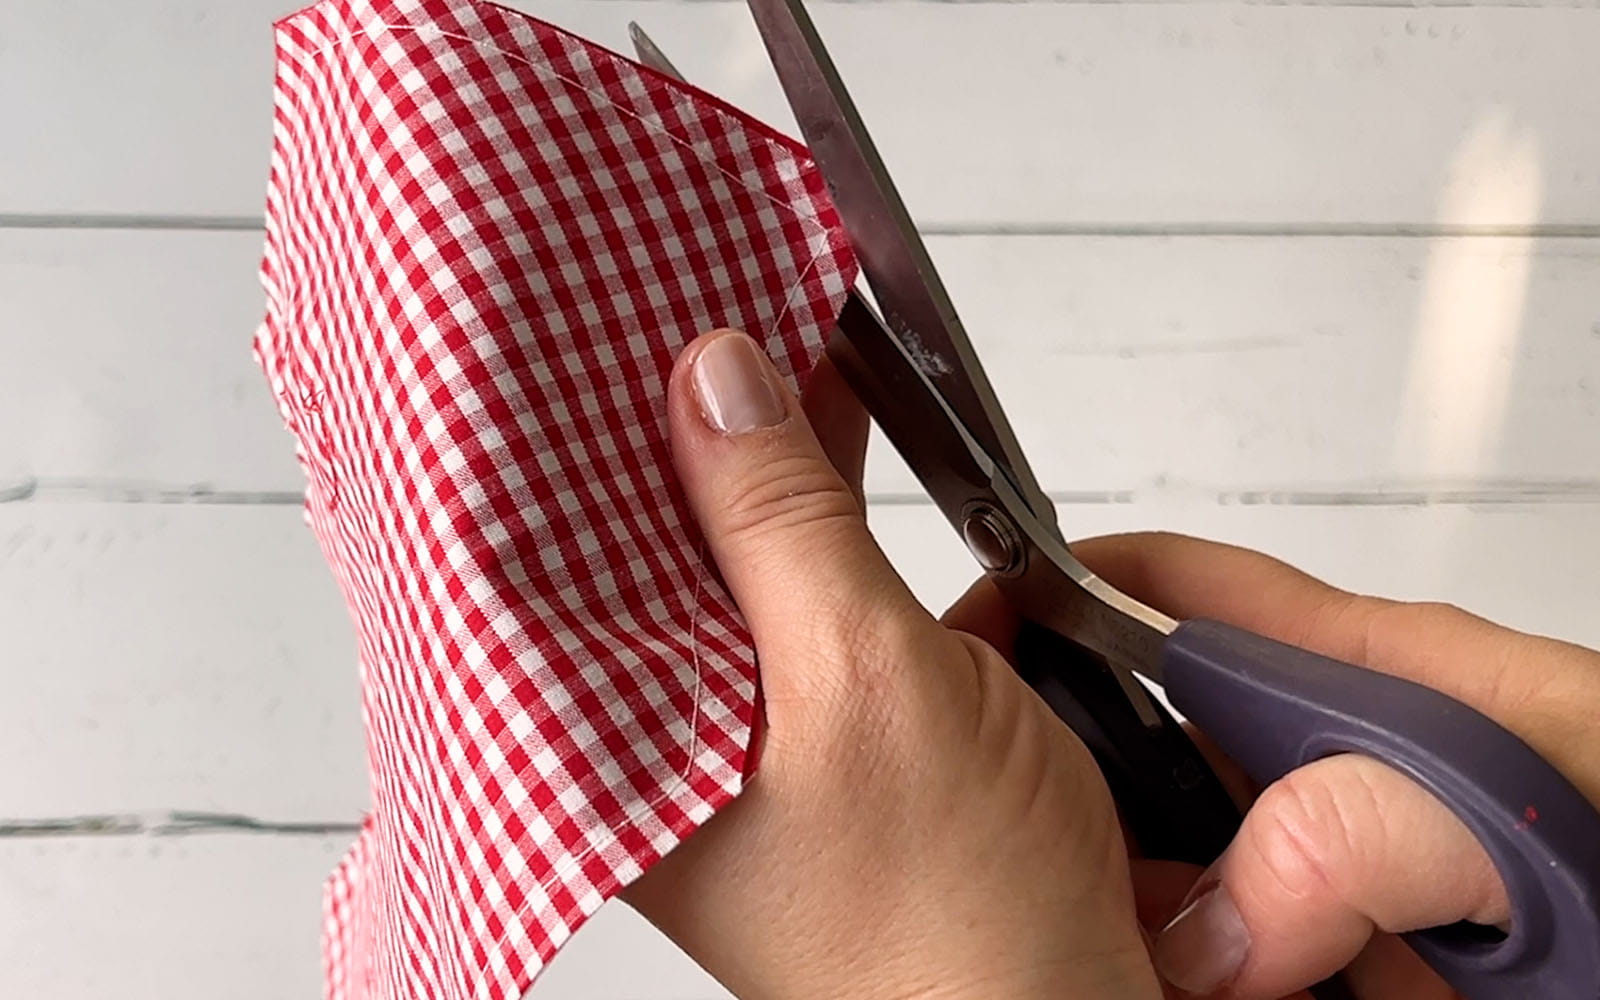 Corners bring trimmed by scissors on sewn gingham fabric envelope